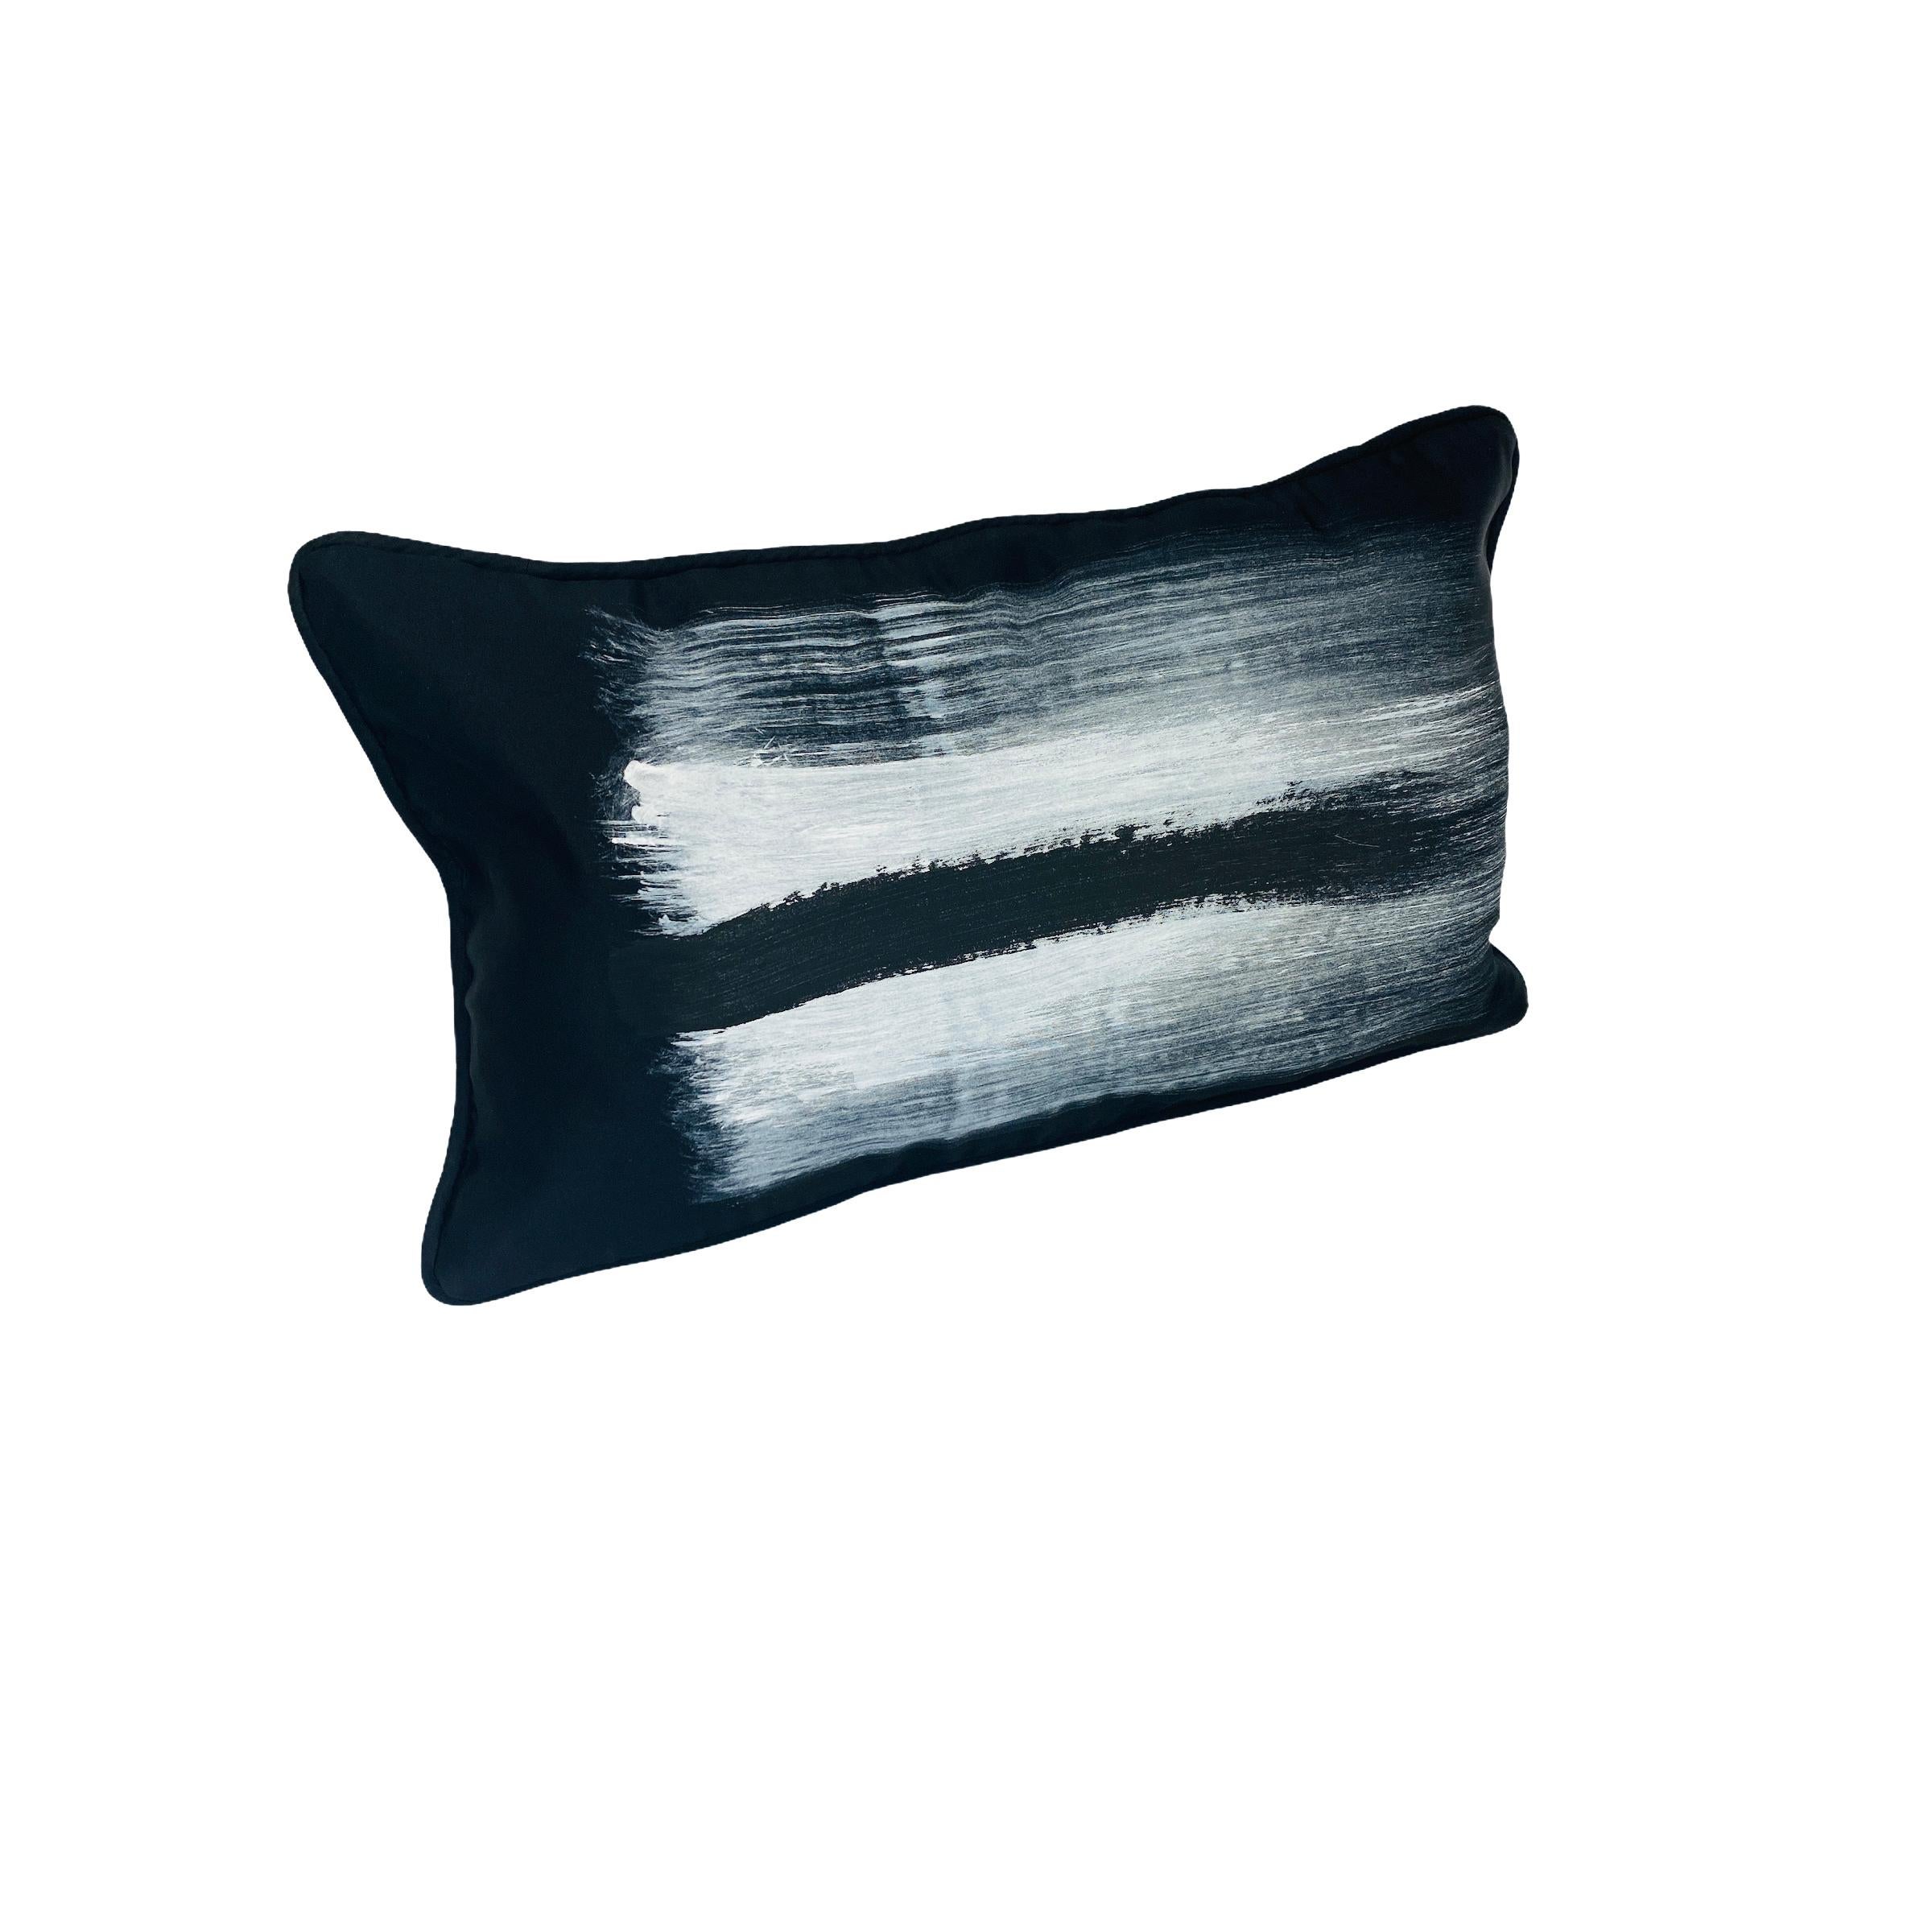 American Black Contemporary Delicately Hand-Painted White-Edged Throw Pillows For Sale